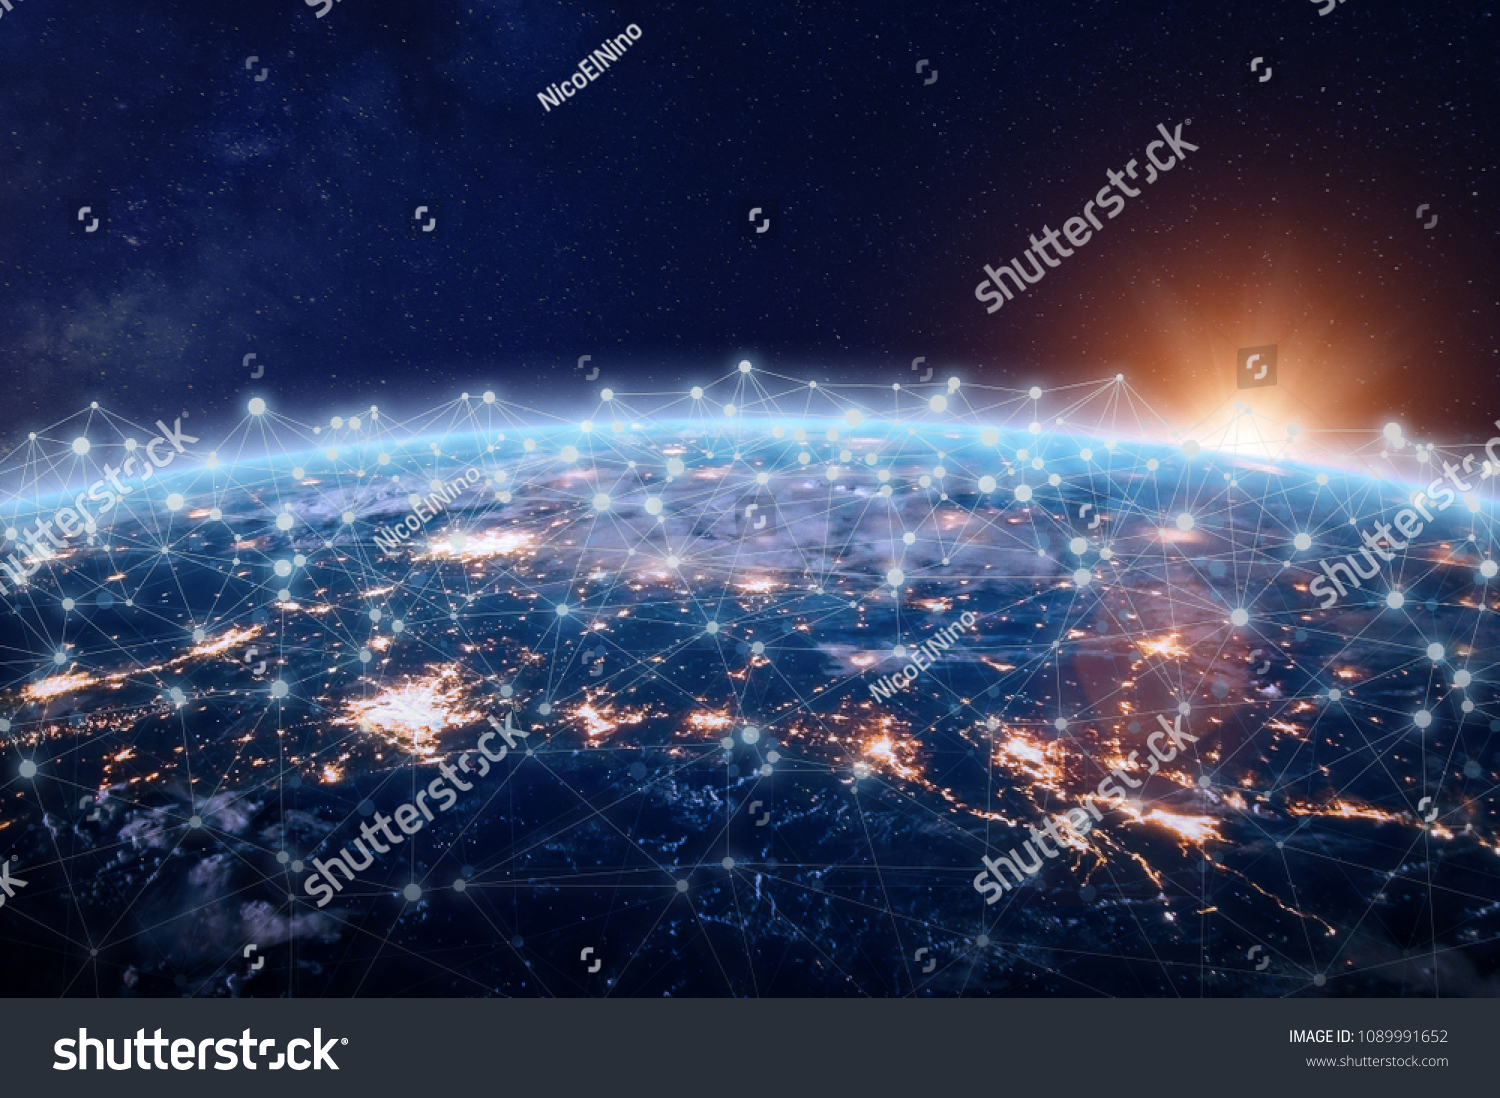 Global world telecommunication network connected around planet Earth, concept about internet and worldwide communication technology for finance, blockchain cryptocurrency or IoT, image from NASA #1089991652